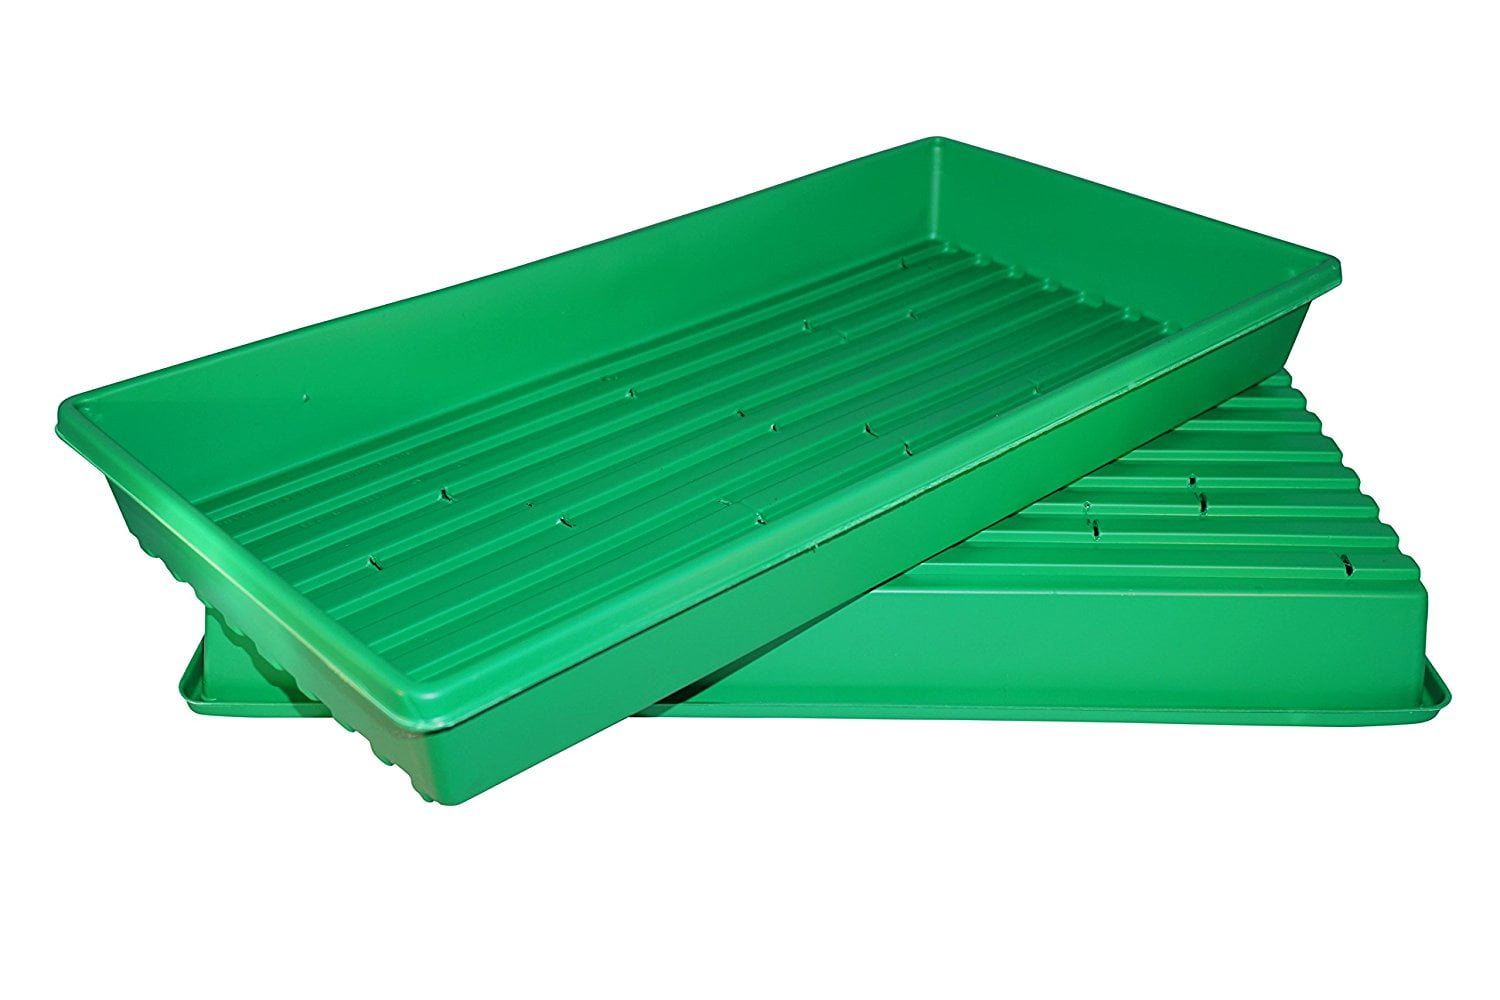 Plants Grow Seedlings 5 Pack 1020 Plant Growing Trays Wheatgrass Lightweight; Designed for Indoor Gardening and Greenhouse use Microgreens Holds Up to 35 lbs; Sturdy ; No Drain Holes